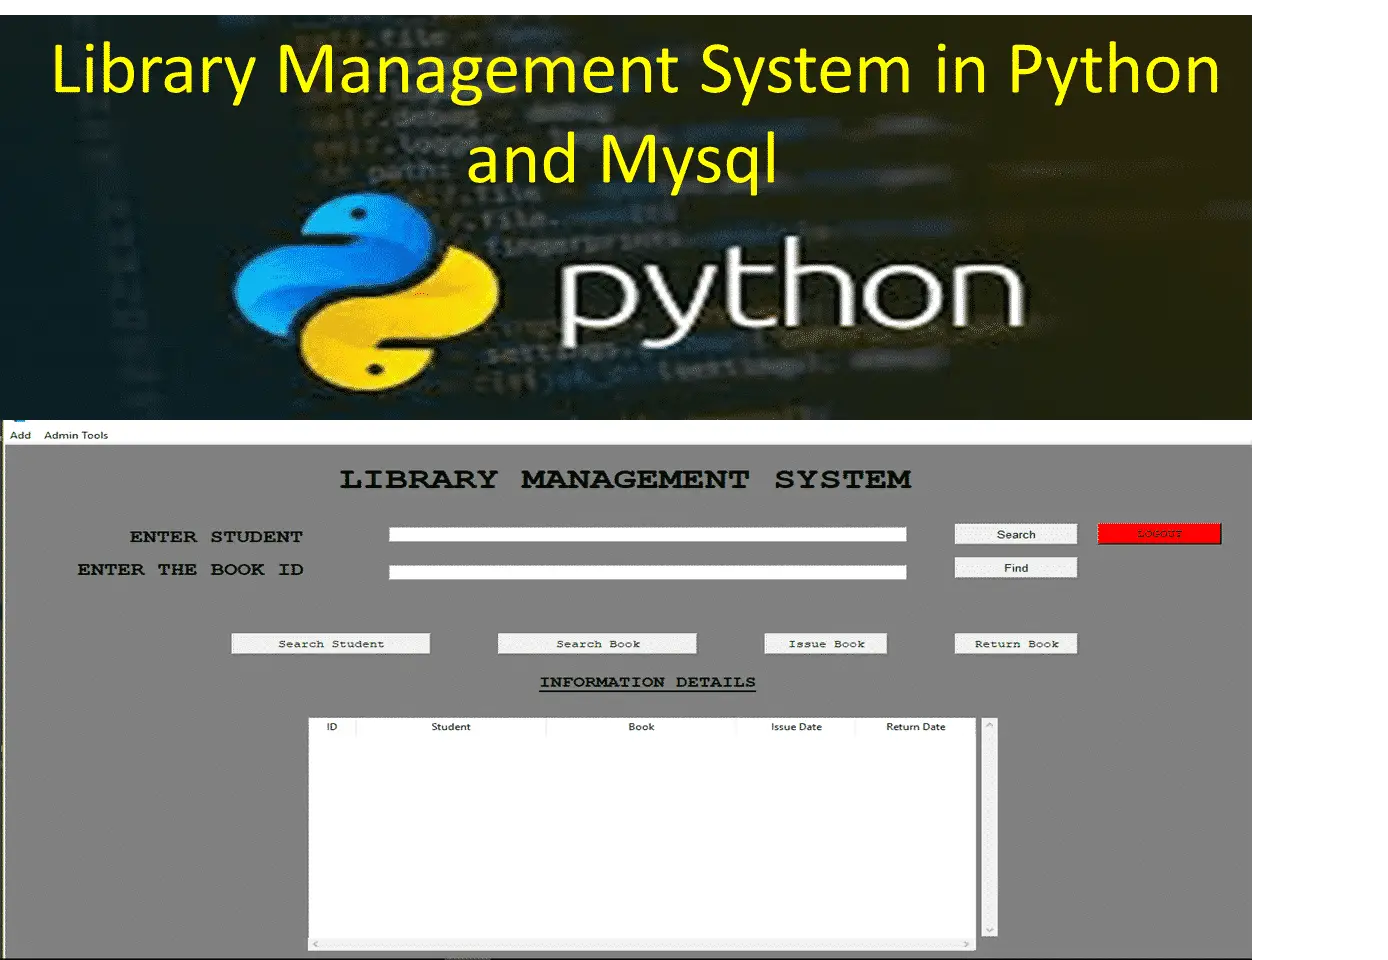 library management system project in java with source code pdf